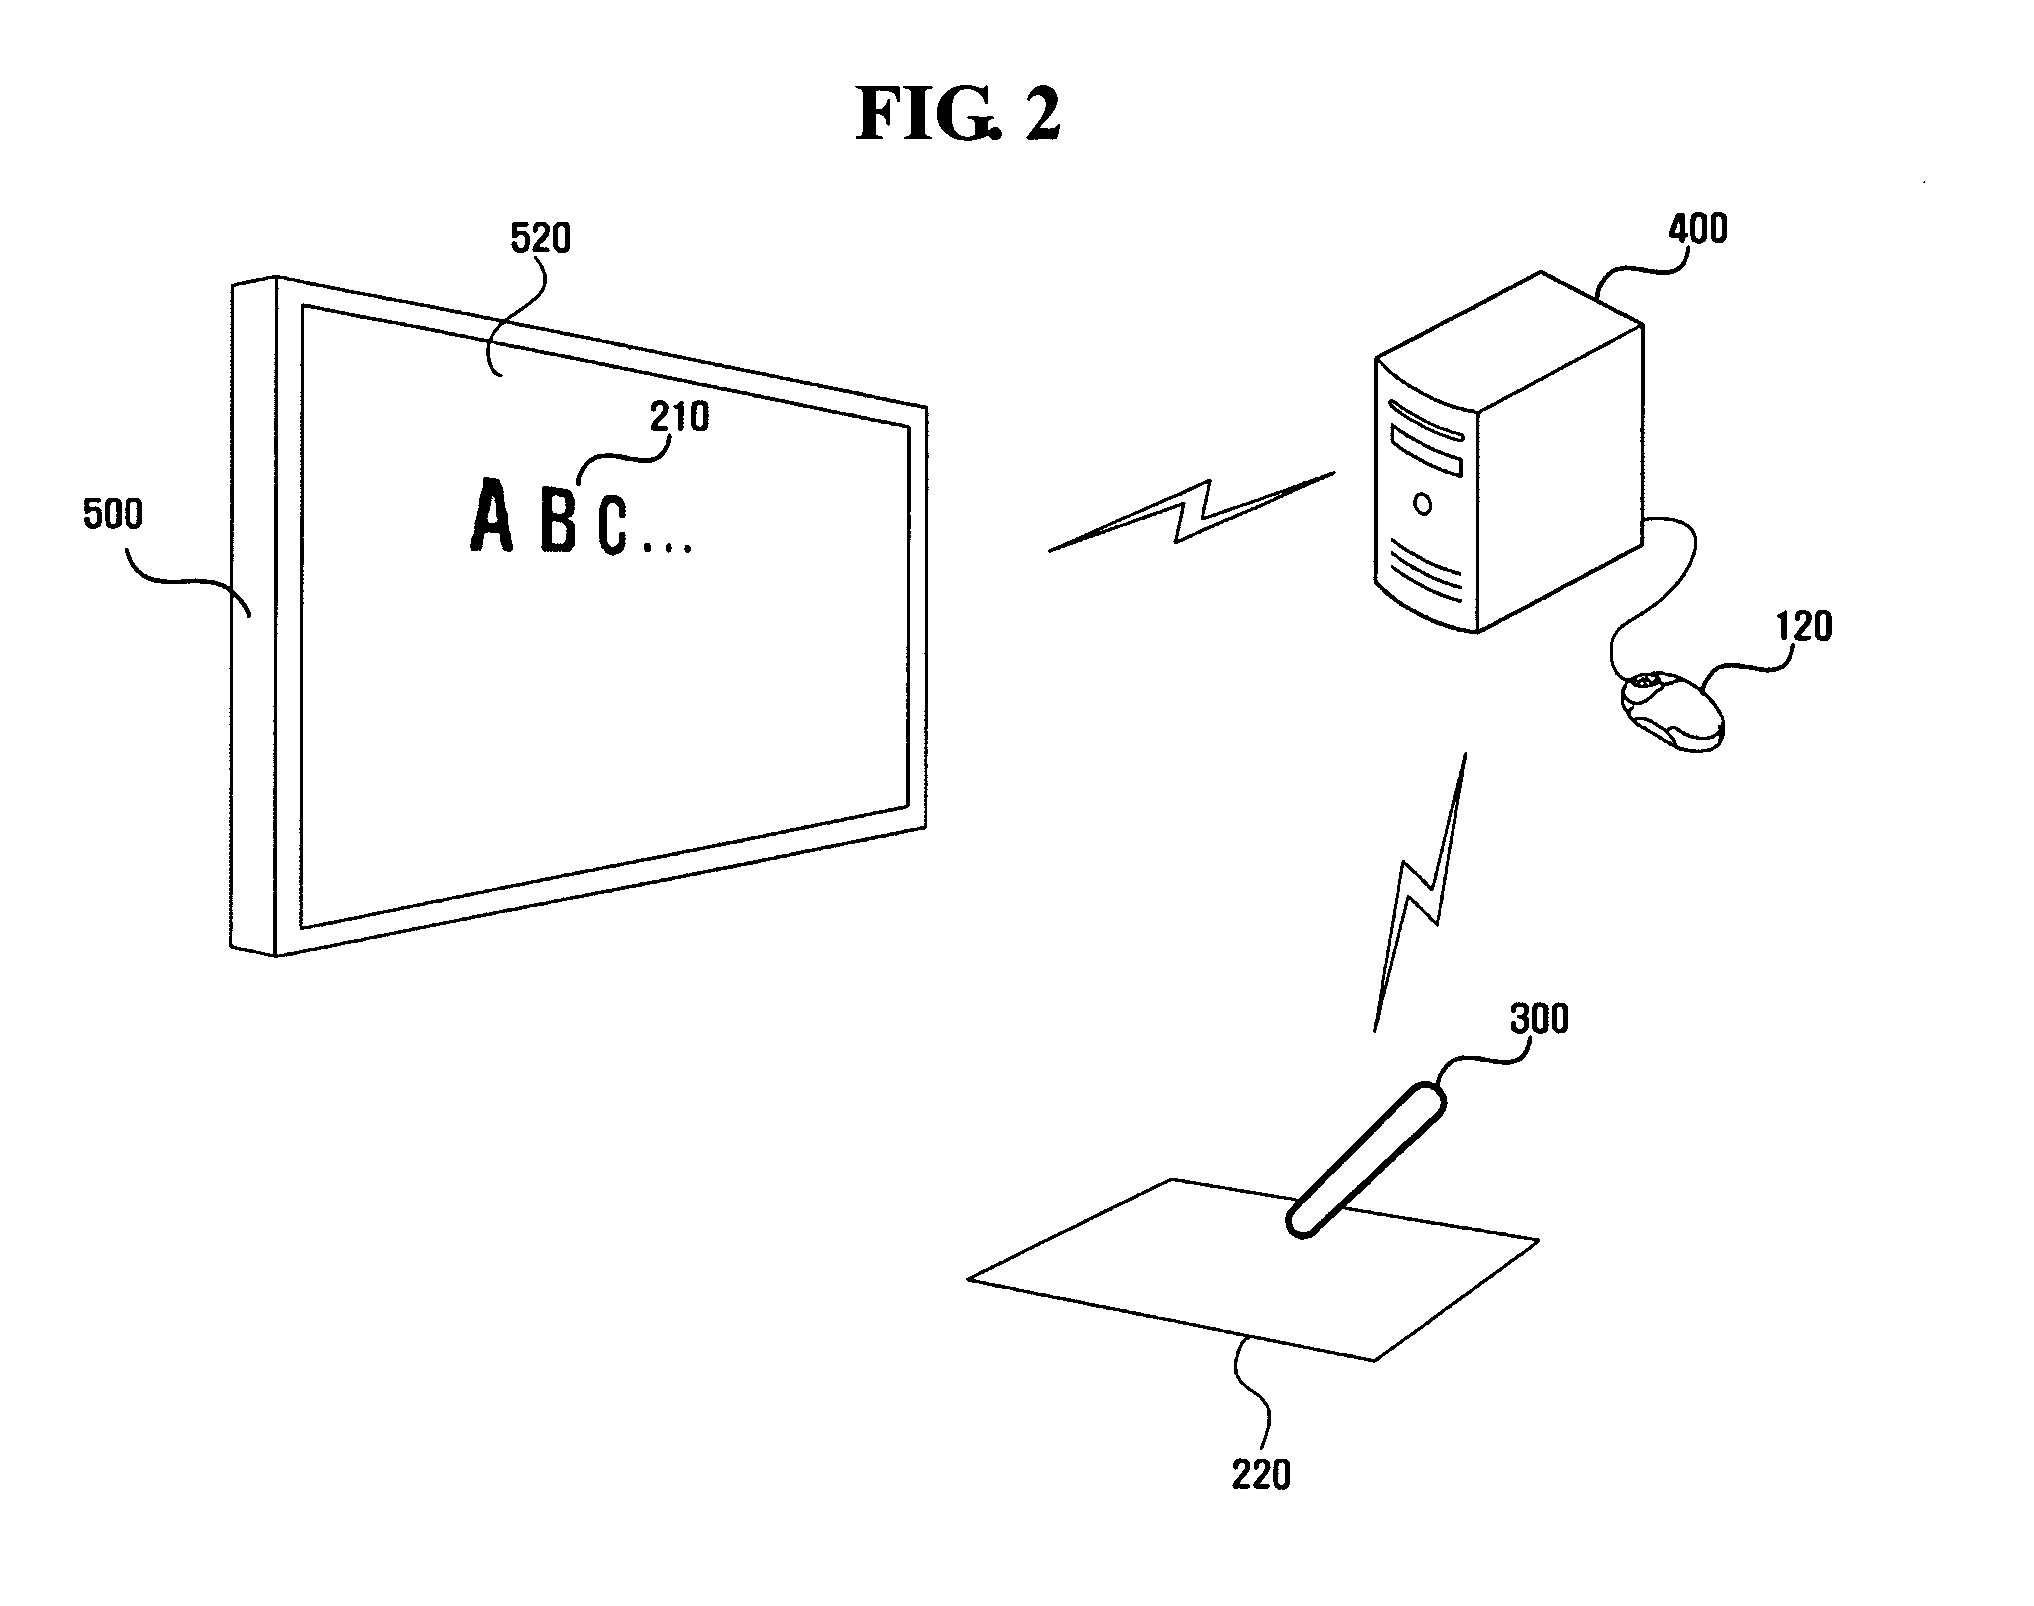 Apparatus and method for recognizing motion